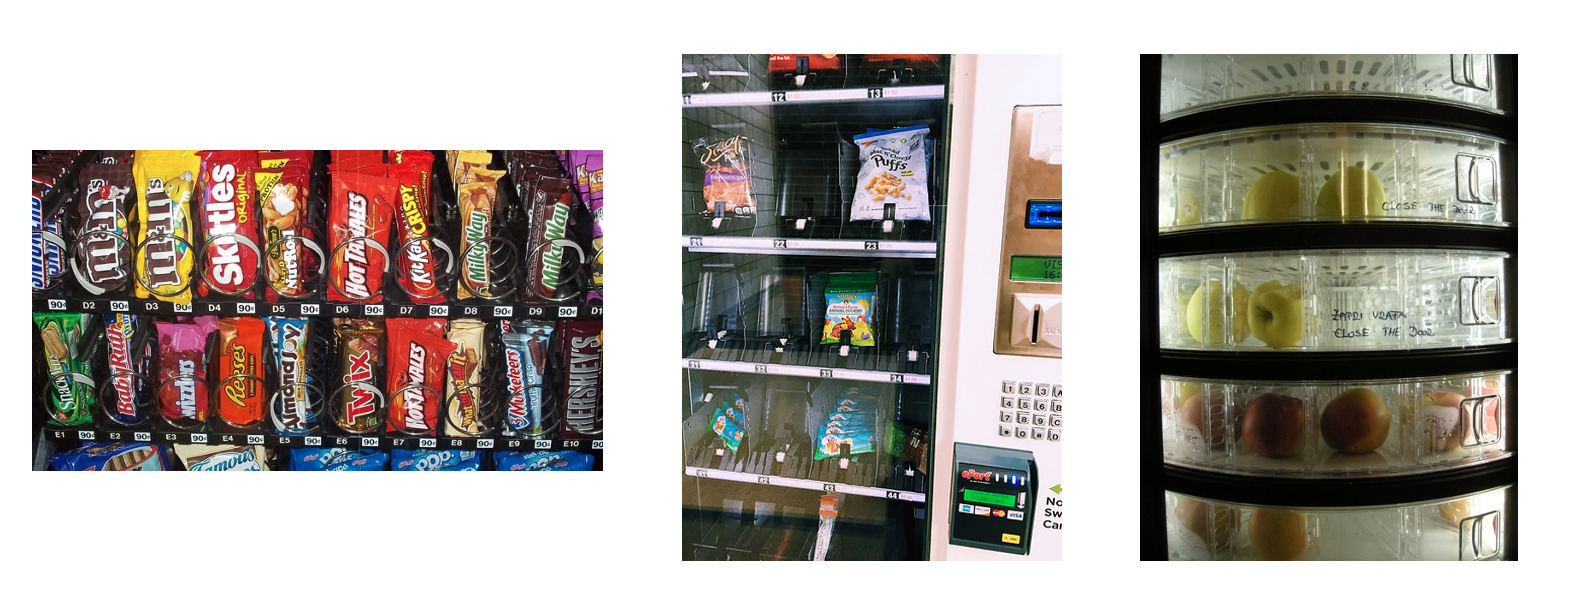 Three vending machines. Left: candy, chips. MIddle: fruit gummies, pita chips. Right: bananas, apples.